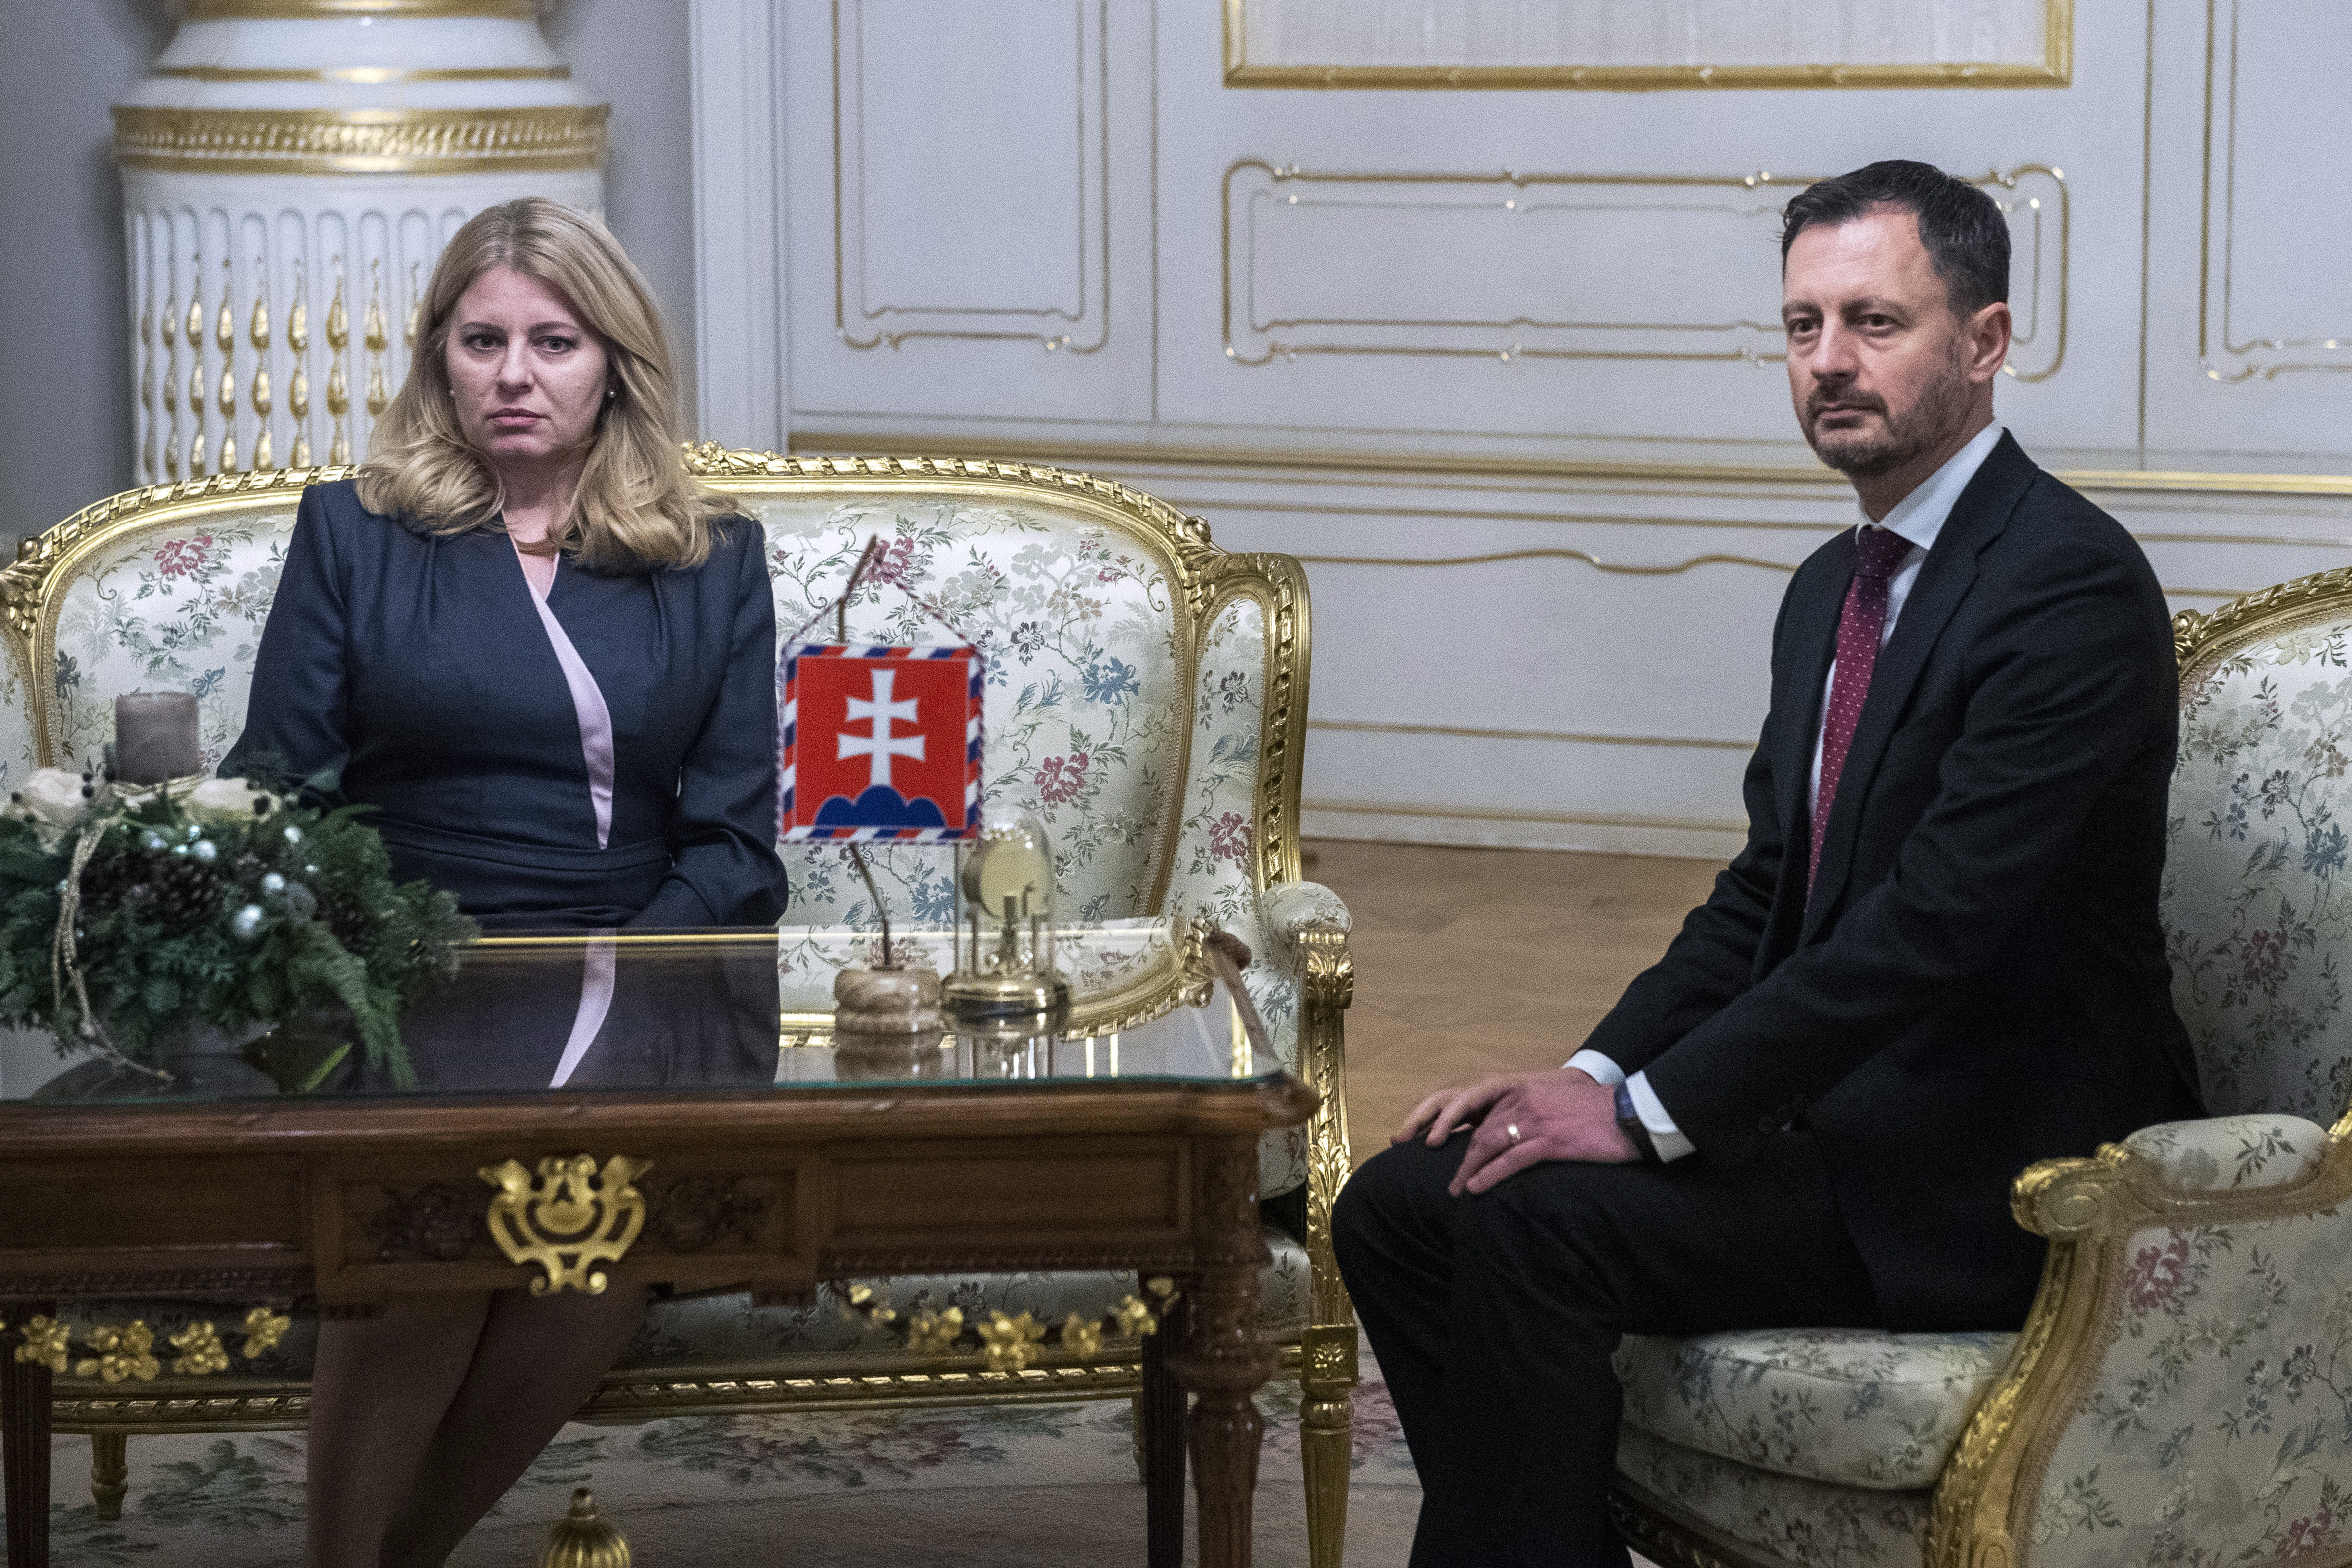 Slovak Prime Minister Eduard Heger meets Slovak President Zuzana Caputova after parliament passed a vote of no confidence in his government at the Presidential Palace in Bratislava